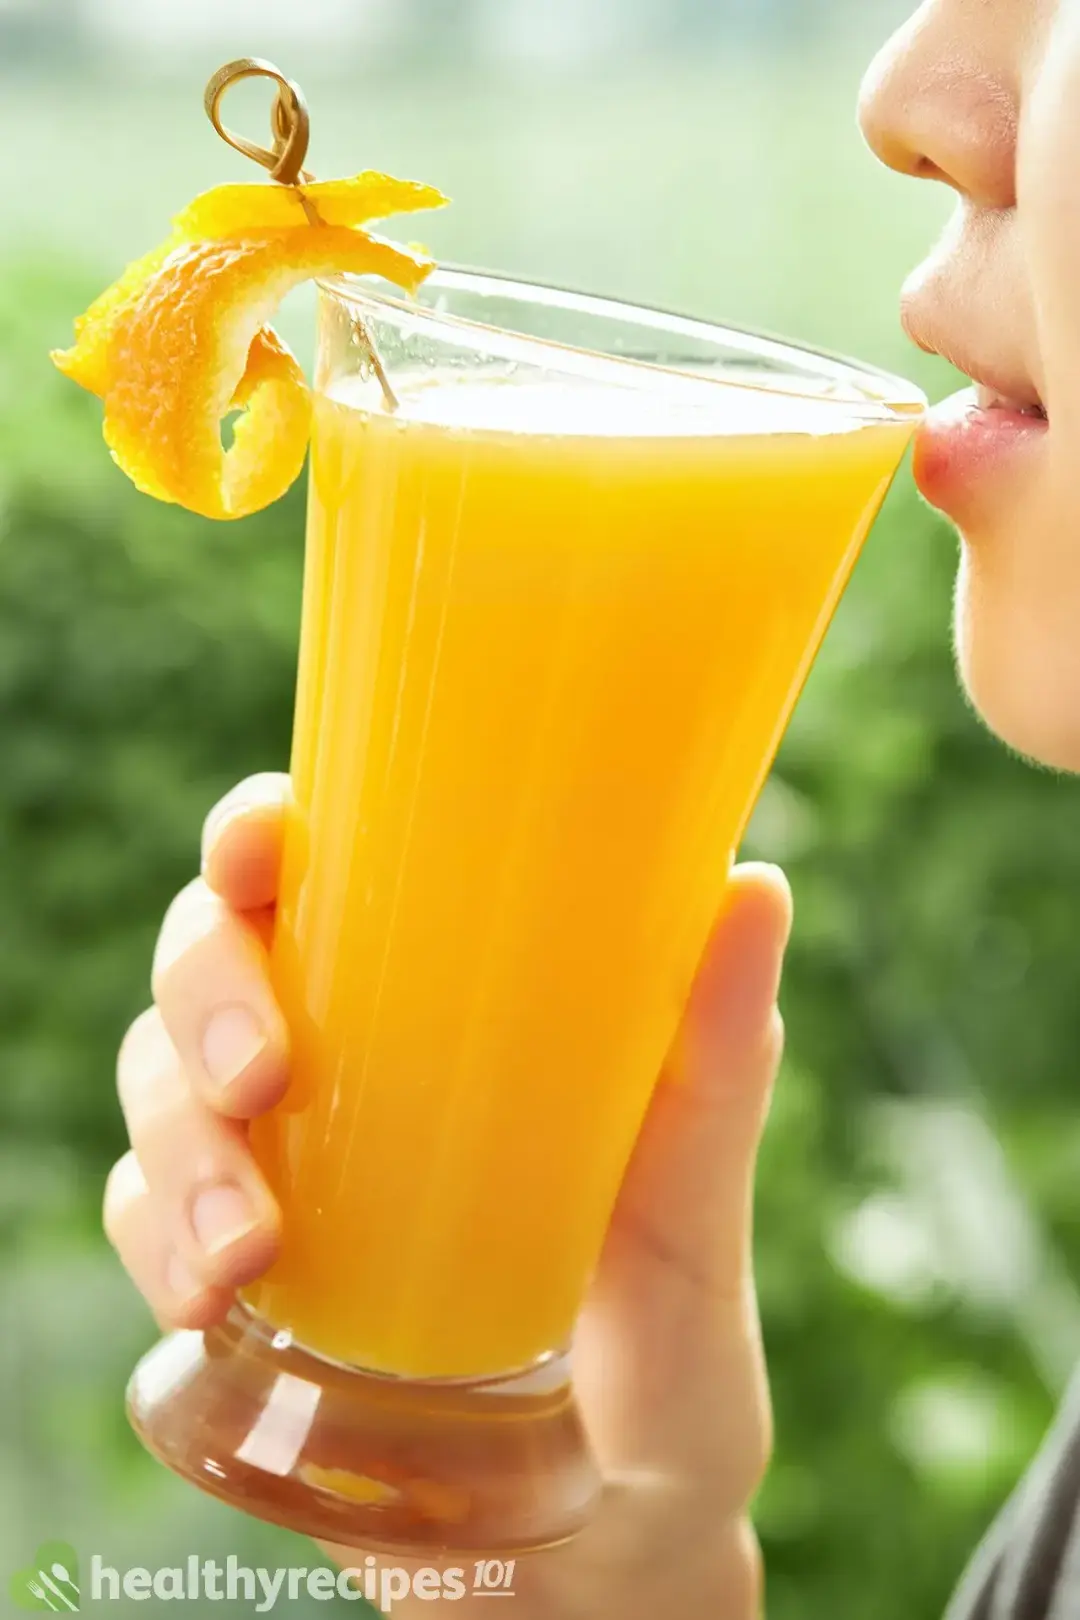 A person drinking a glass of orange juice filled all the way to the top